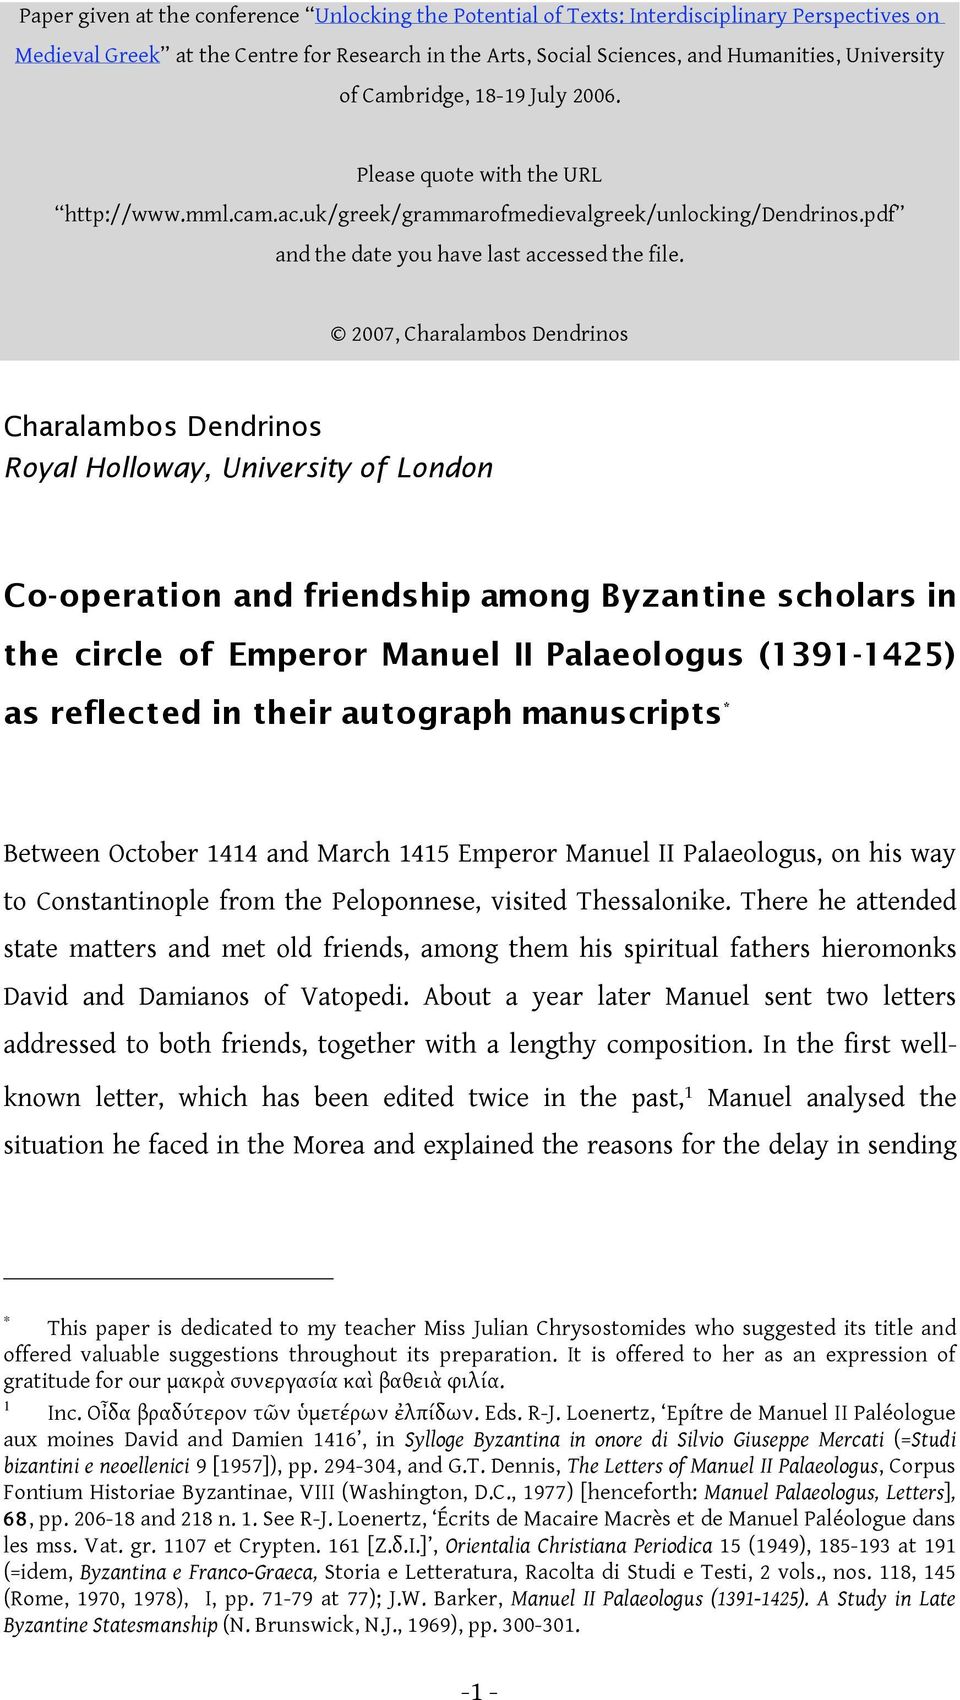 2007, Charalambos Dendrinos Charalambos Dendrinos Royal Holloway, University of London Co-operation and friendship among Byzantine scholars in the circle of Emperor Manuel II Palaeologus (1391-1425)